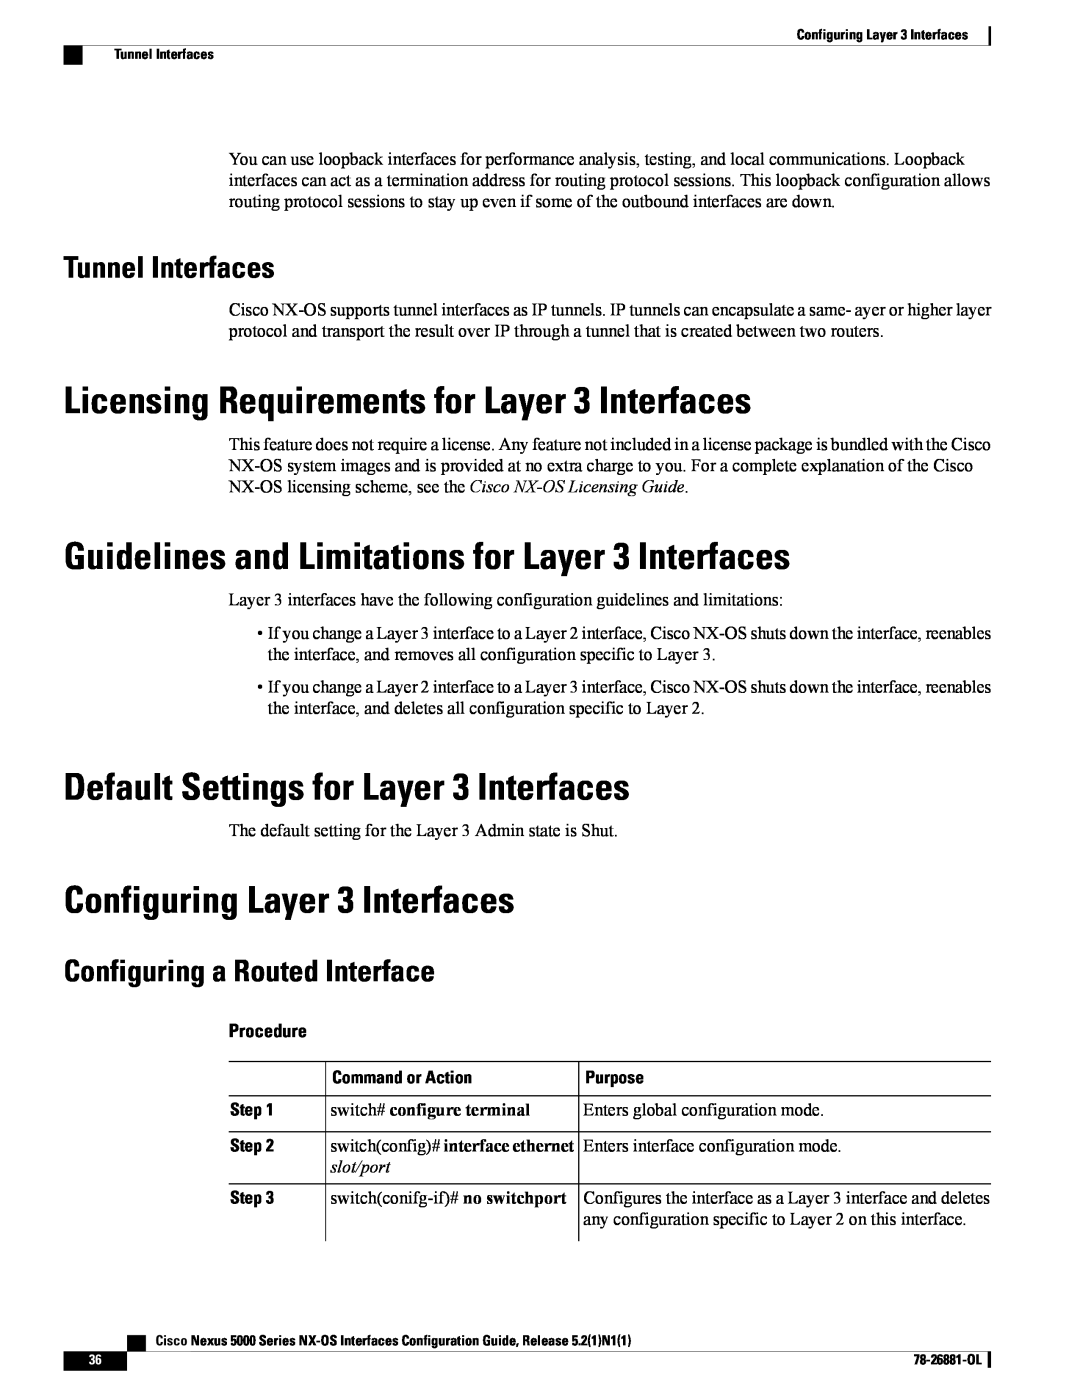 Cisco Systems N5KC5596TFA Licensing Requirements for Layer 3 Interfaces, Guidelines and Limitations for Layer 3 Interfaces 